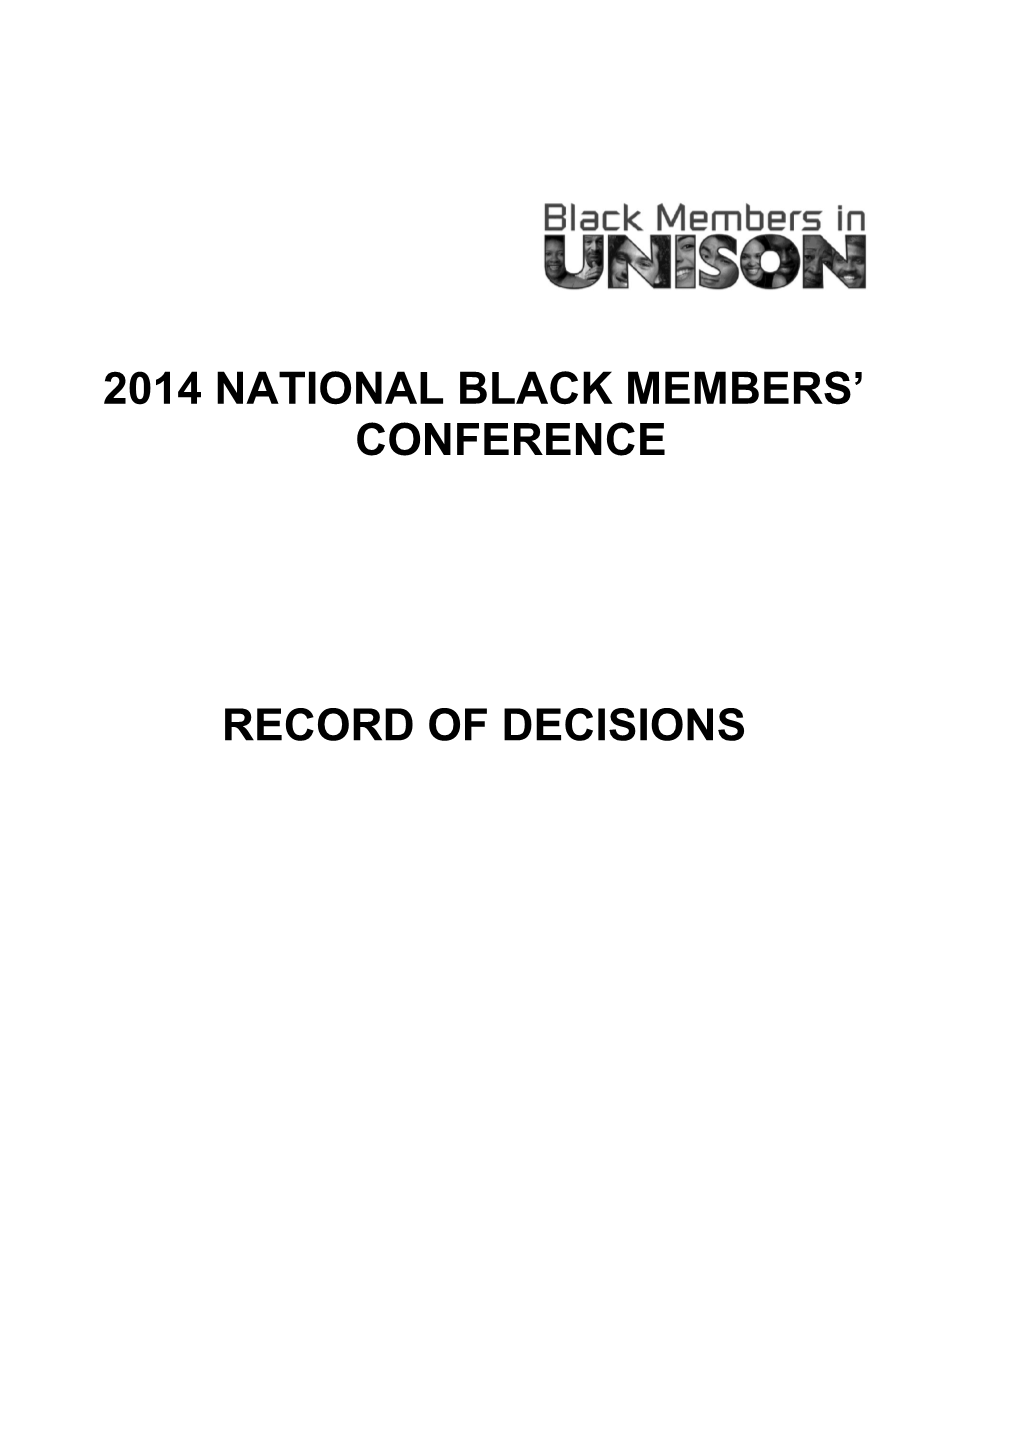 2014 National Black Members' Conference Decisions